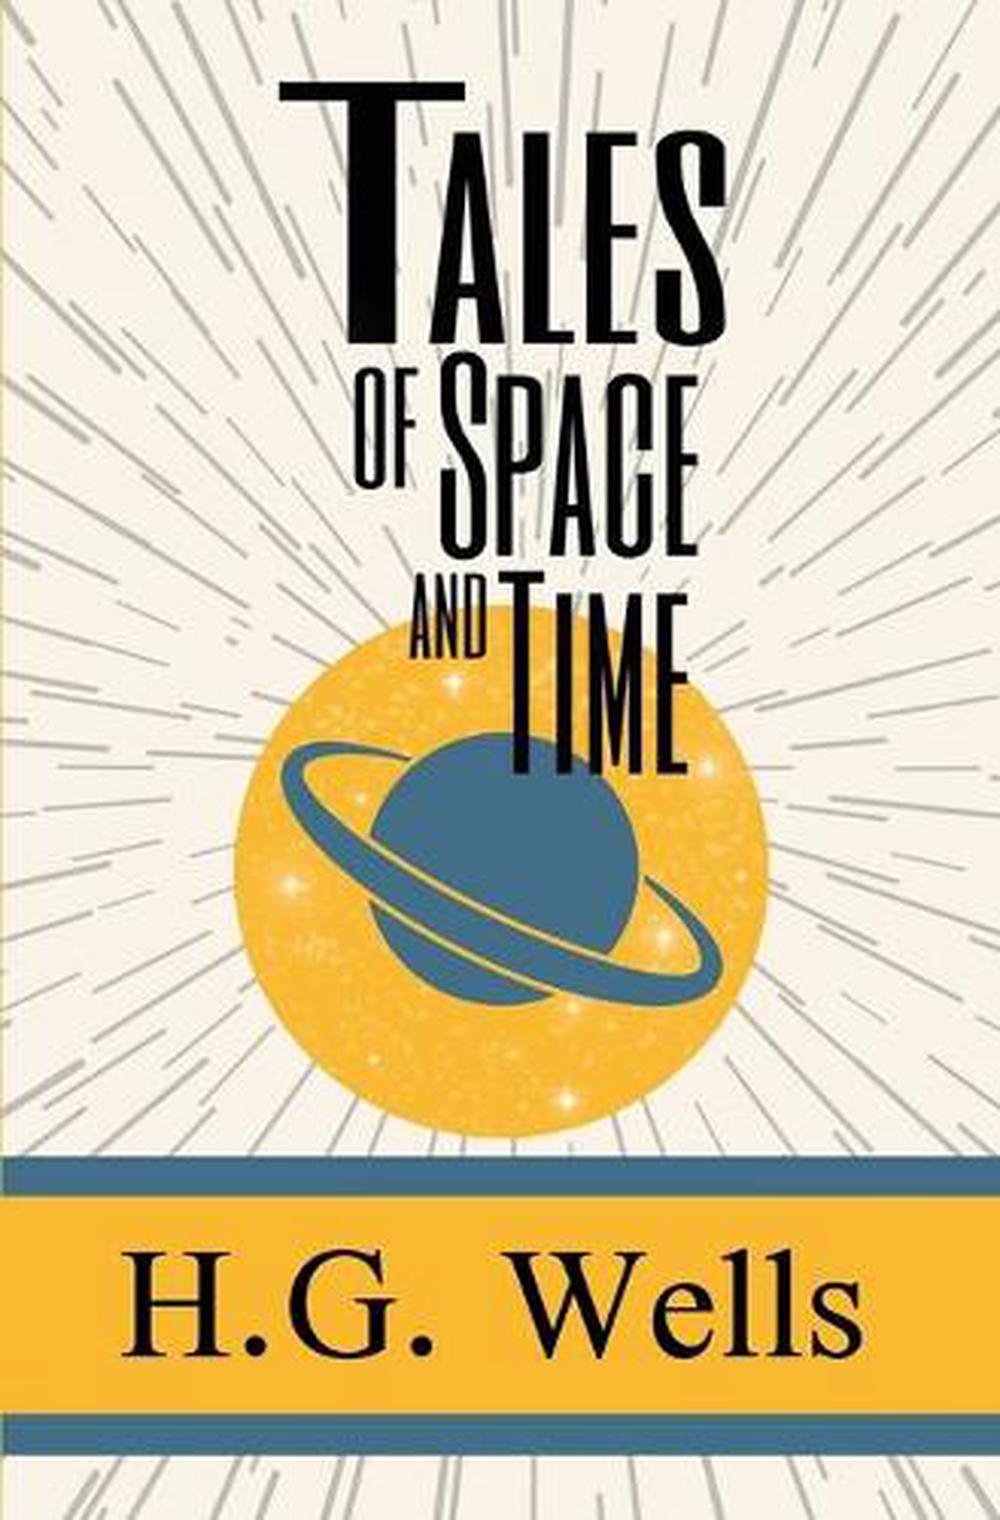 Tales of Space and Time by H.G. Wells (English) Paperback Book Free ...